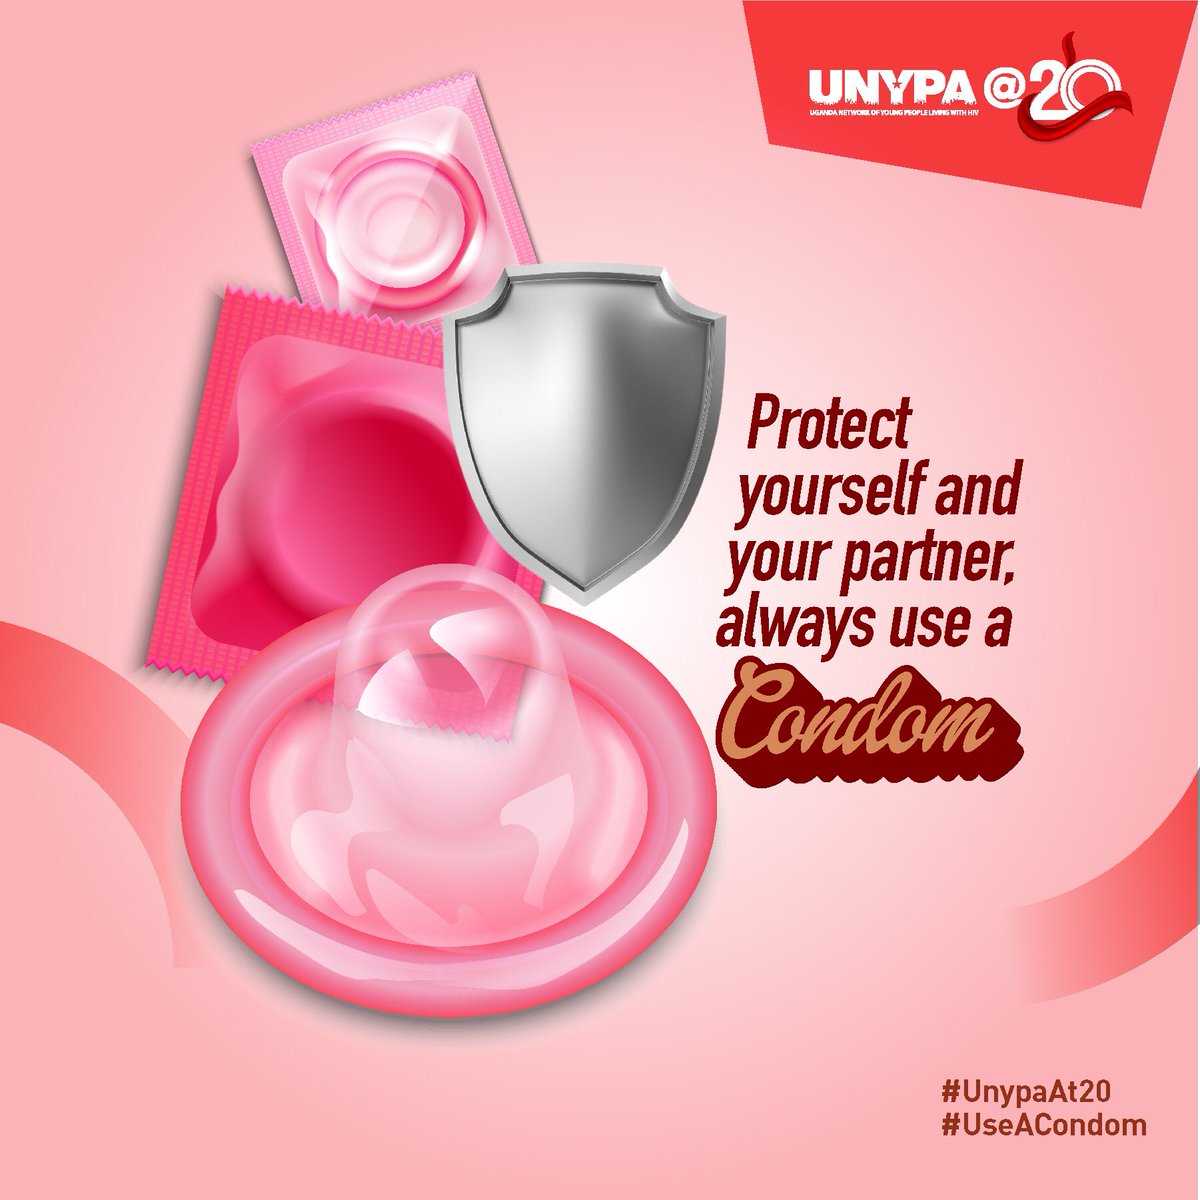 It has finally arrived that weekend vibe 💃🏻💃🏻 but remember  👇👇

Condoms are so cheap then treating an infection or raising a baby. 

#UnypaAt20 #UseACondom